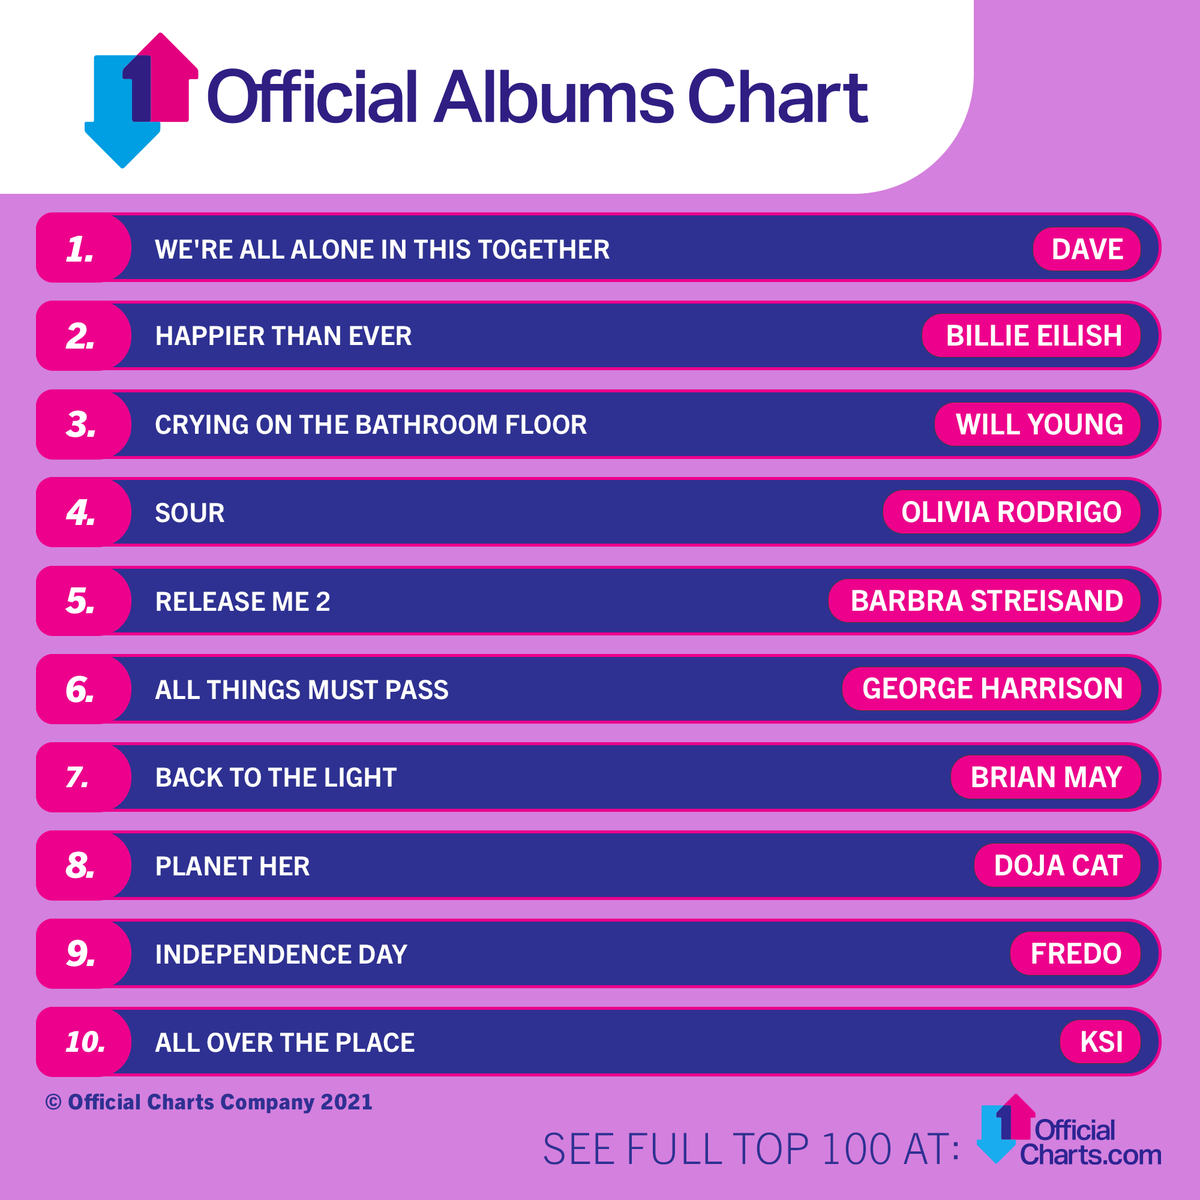 Official Charts on Twitter: "The only place you can view this week's Official UK Albums Chart is now live! See the Top 10 below, full Top here: https://t.co/qA3DHUWWrb https://t.co/R9YsXIfaQ3" / Twitter